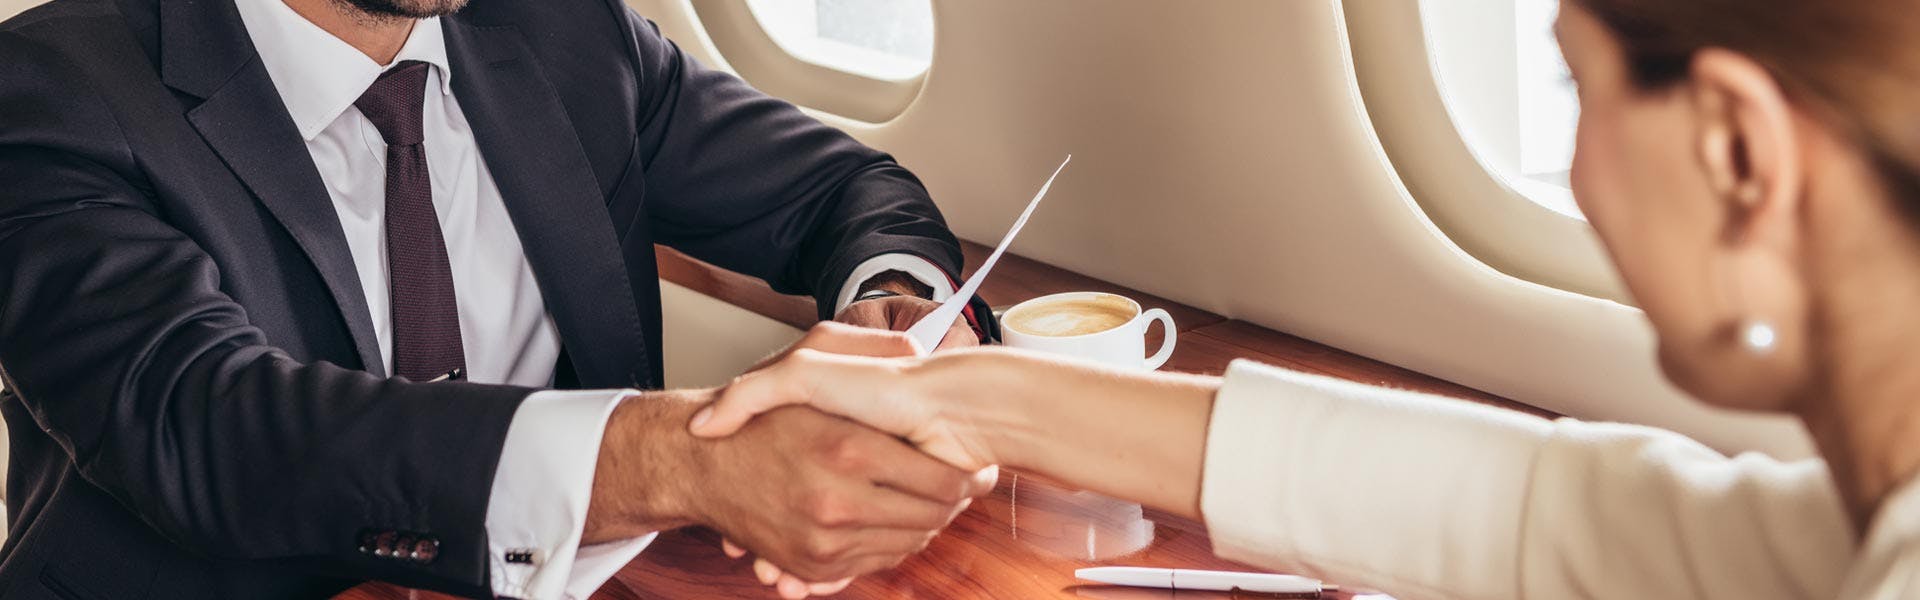 Private charter flights for groups could be the best option for you for business travel.